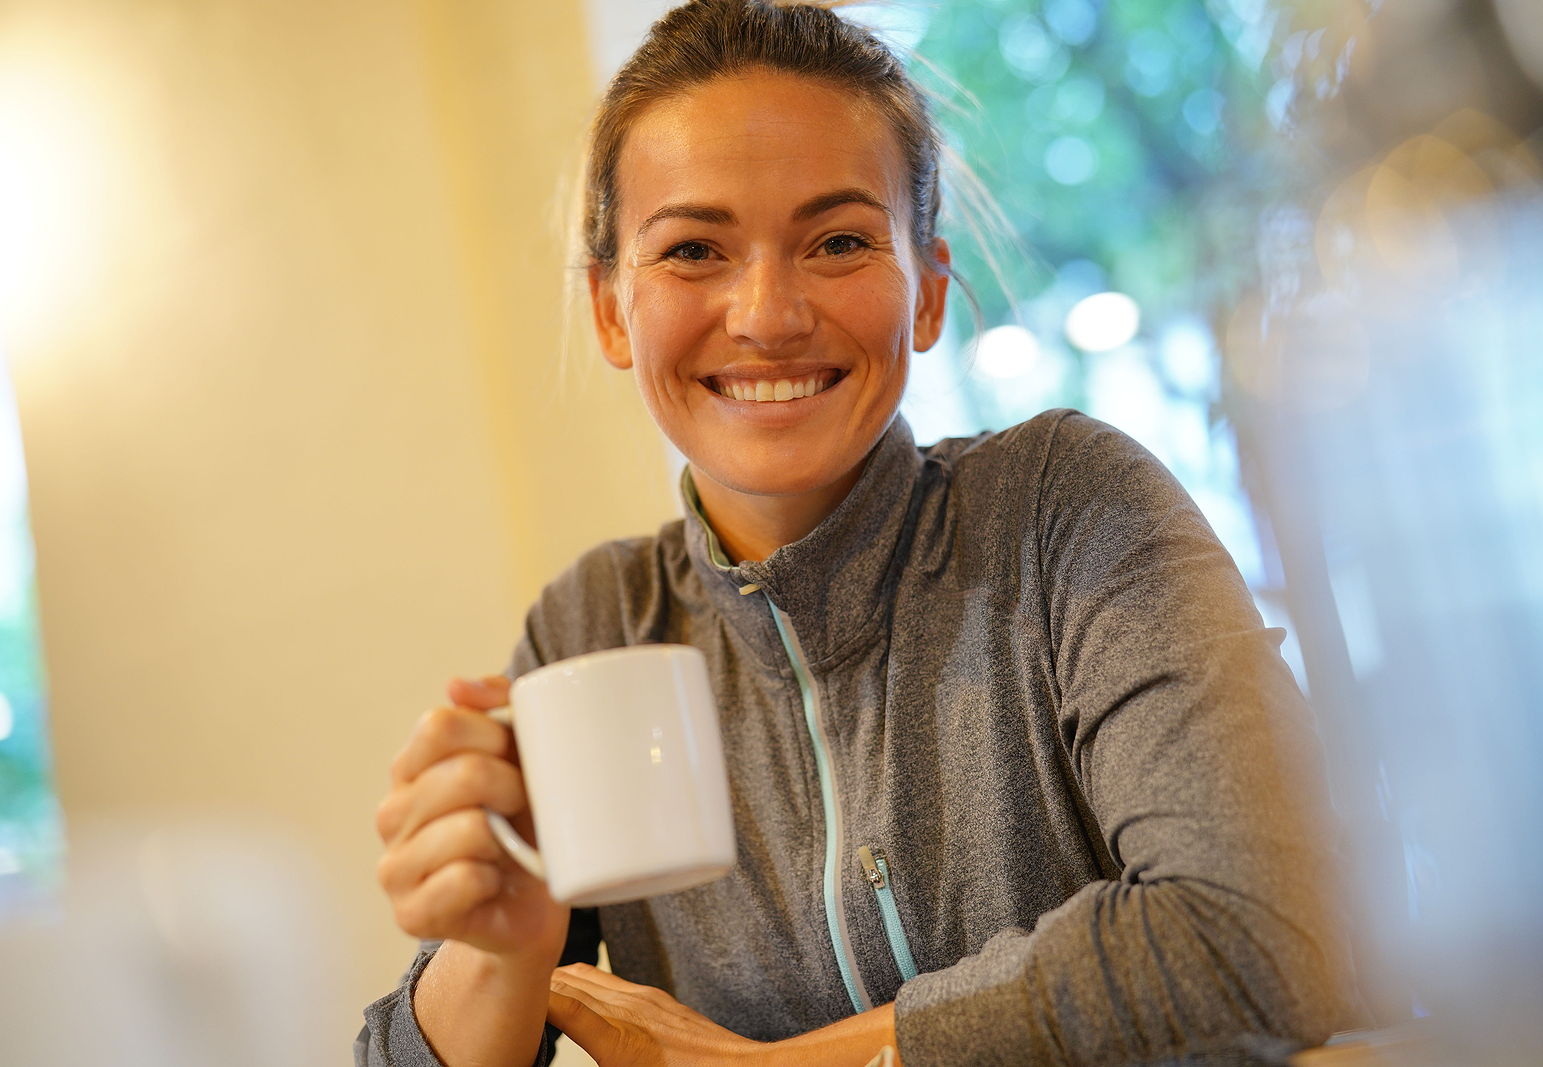 An older blond haired woman with her hair up holds her coffee cup and smiles big for the camera.